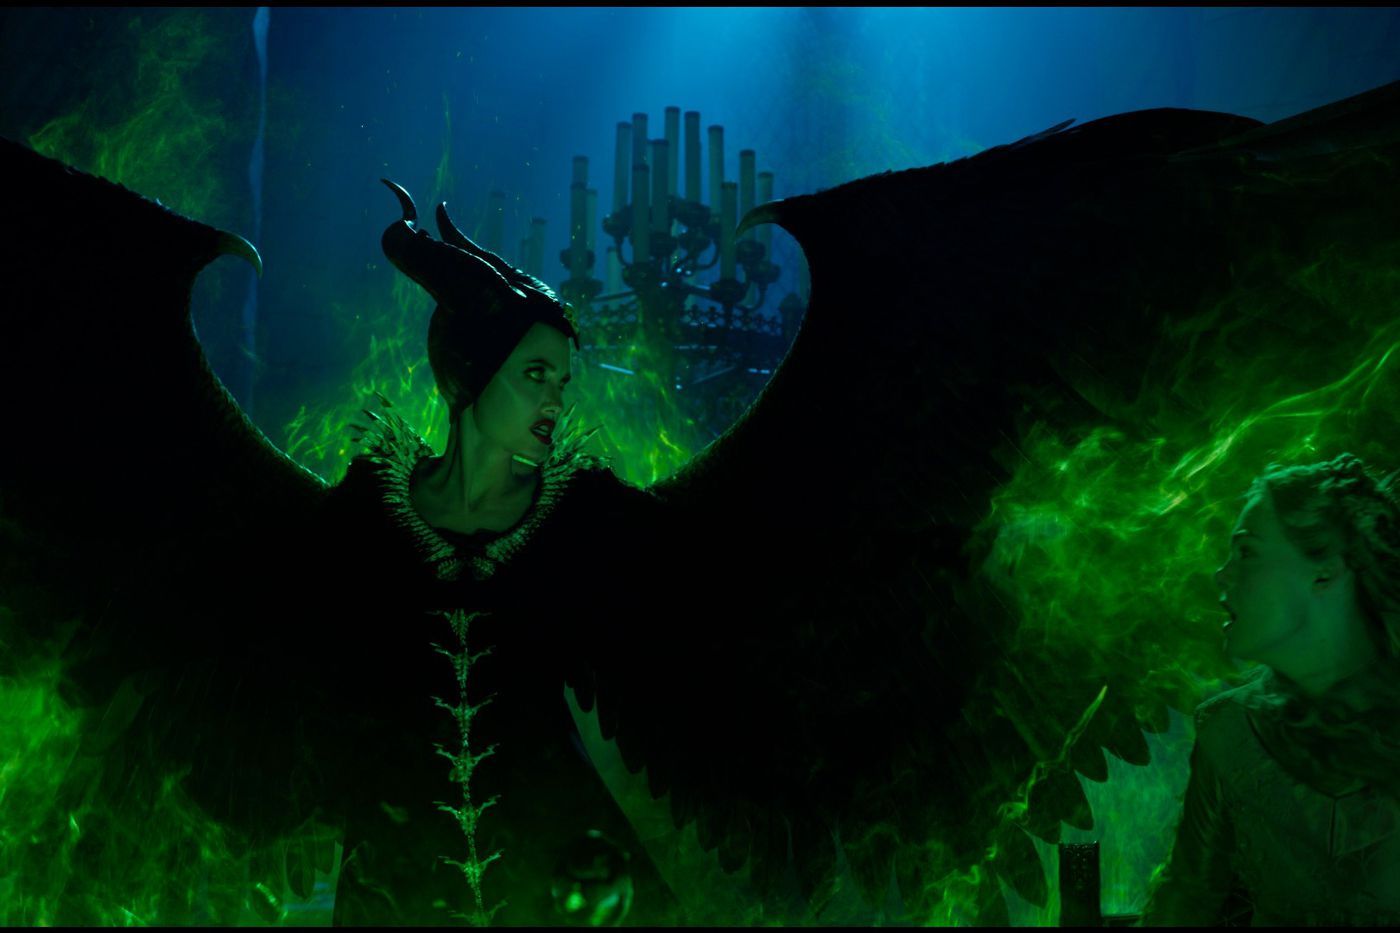 Maleficent: Mistress of Evil review: a boldly bonkers fantasy film